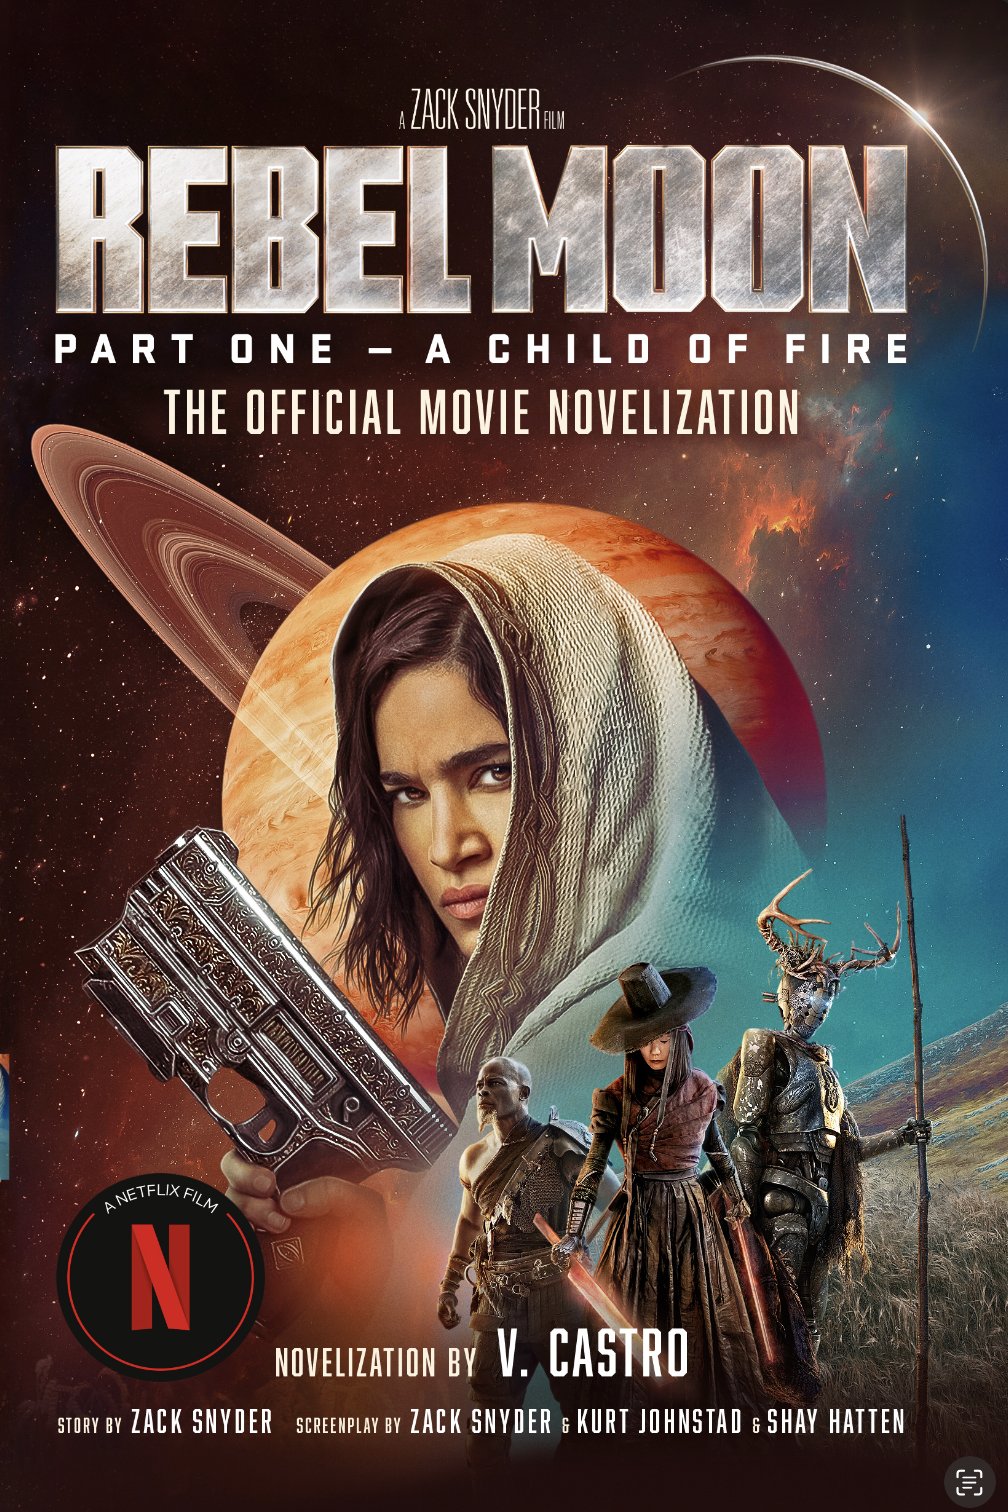 Watch Rebel Moon — Part One: A Child of Fire